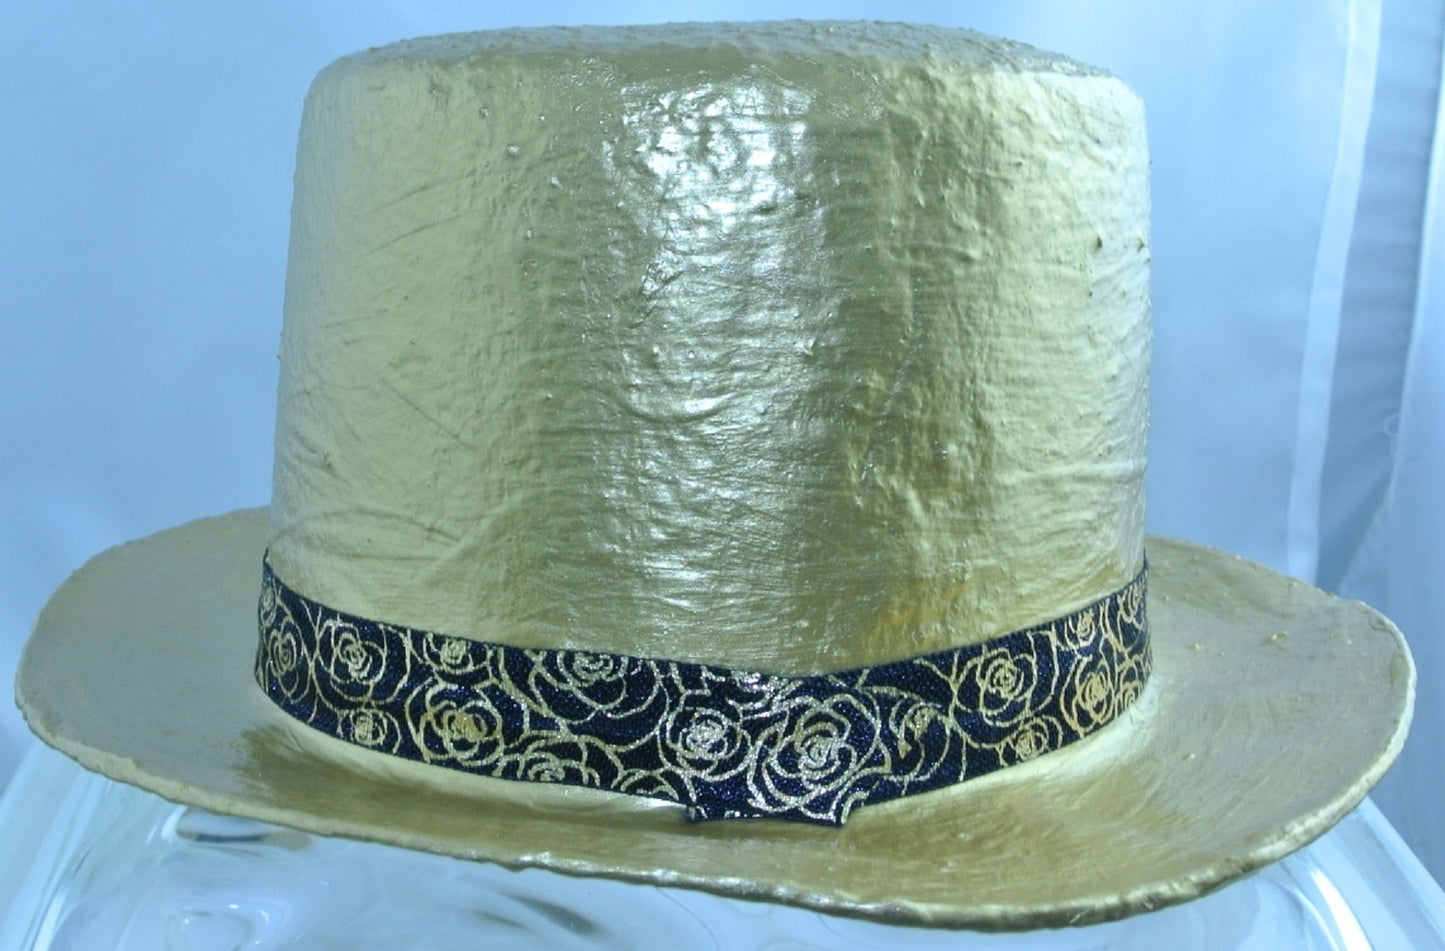 GOLD ROCKET FRONT BLACK GOLD FLOWER RIBBON GOLD PAINTED LARGE TOP HAT STARR WILDE STEAMPUNK FORTRESS